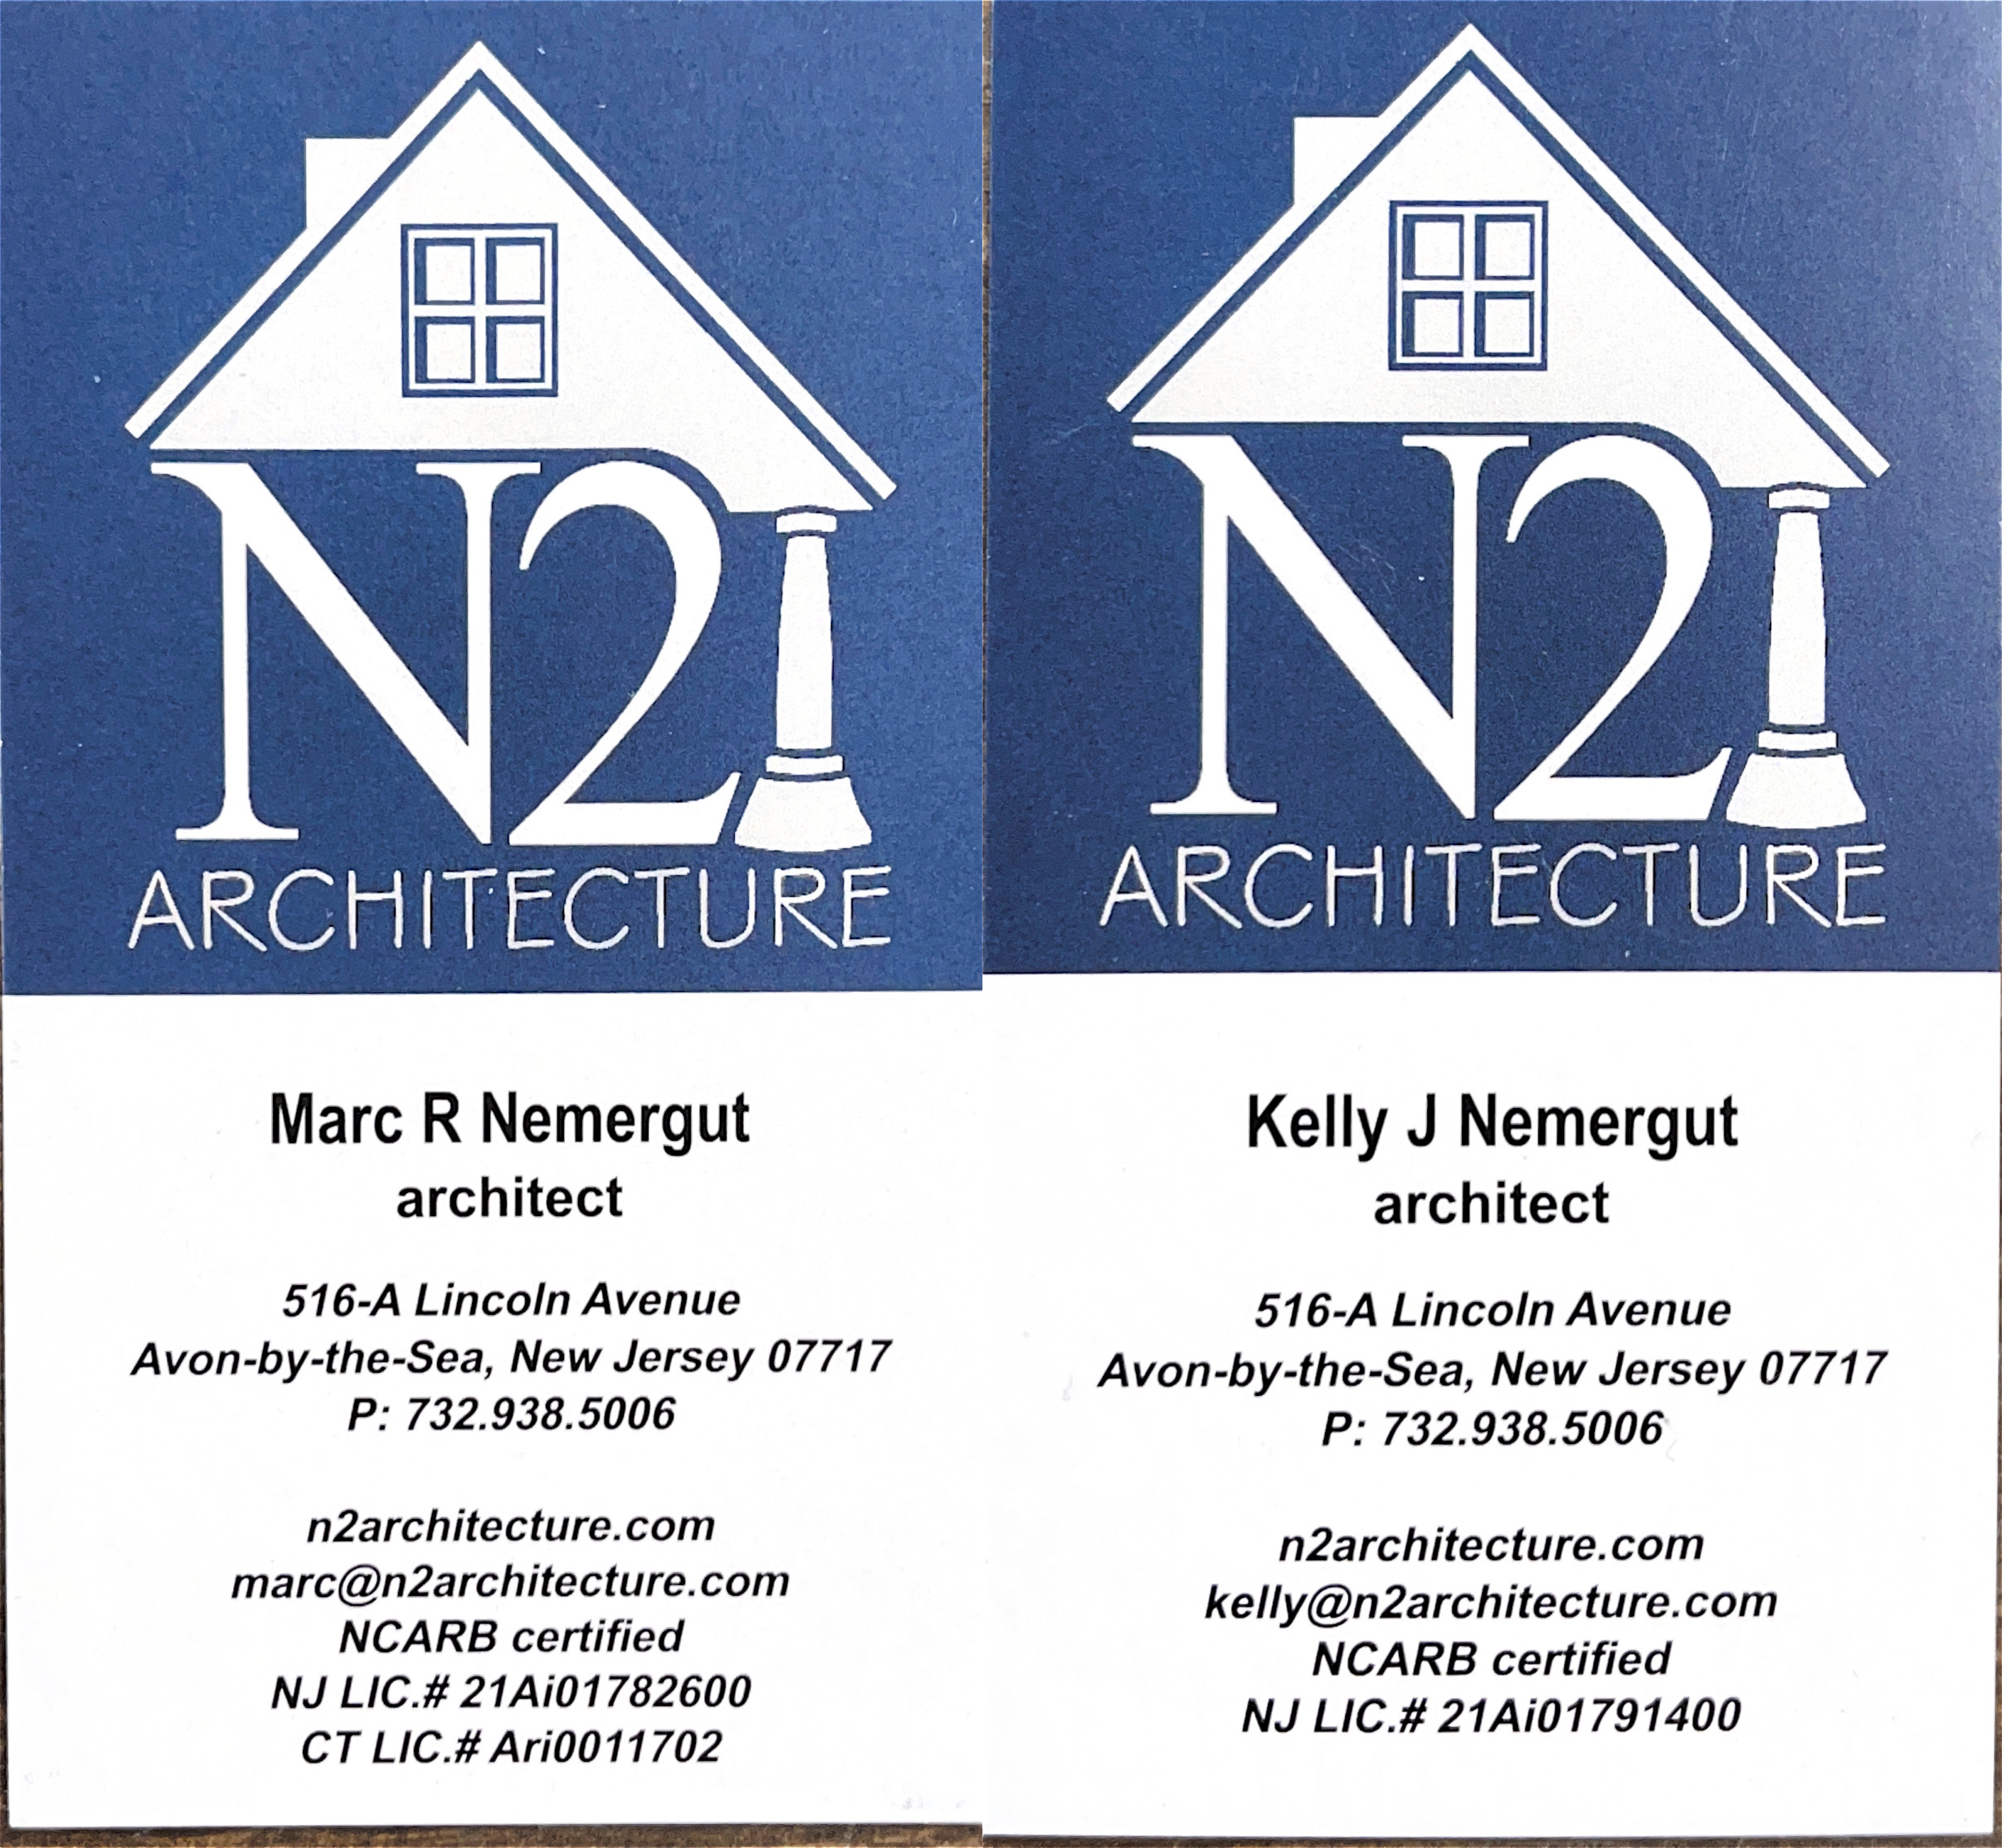 N2 Architecture